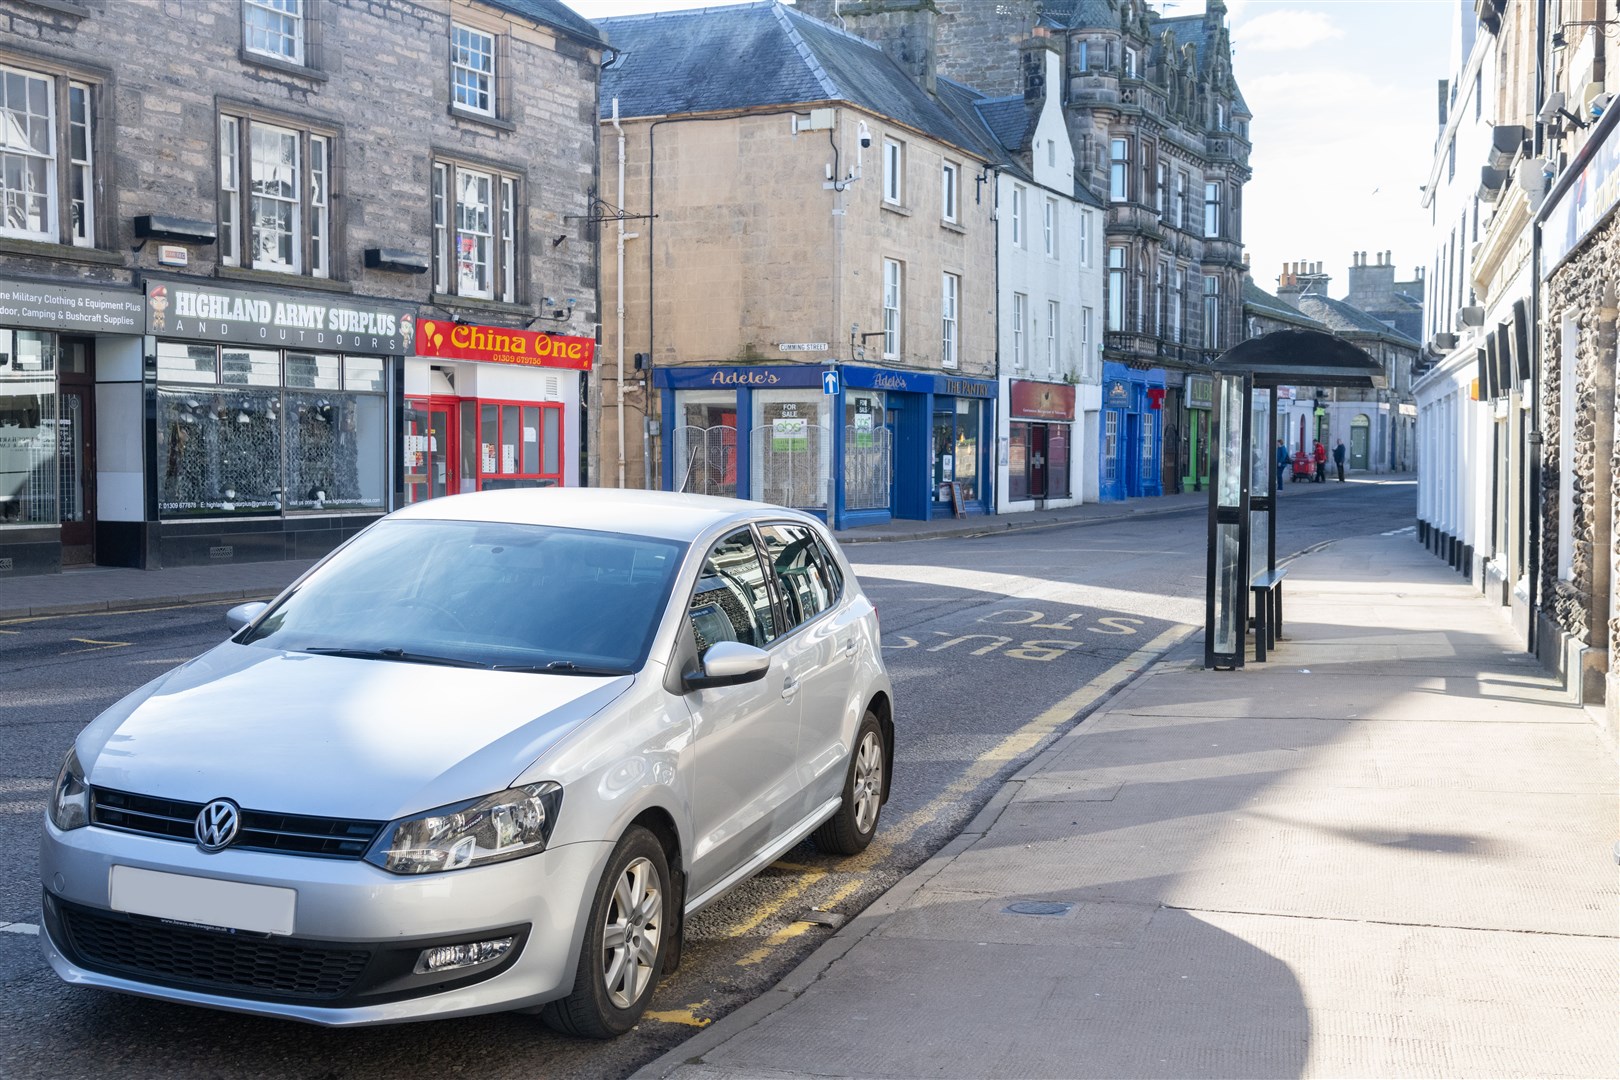 Illegally parked in the centre of Forres.